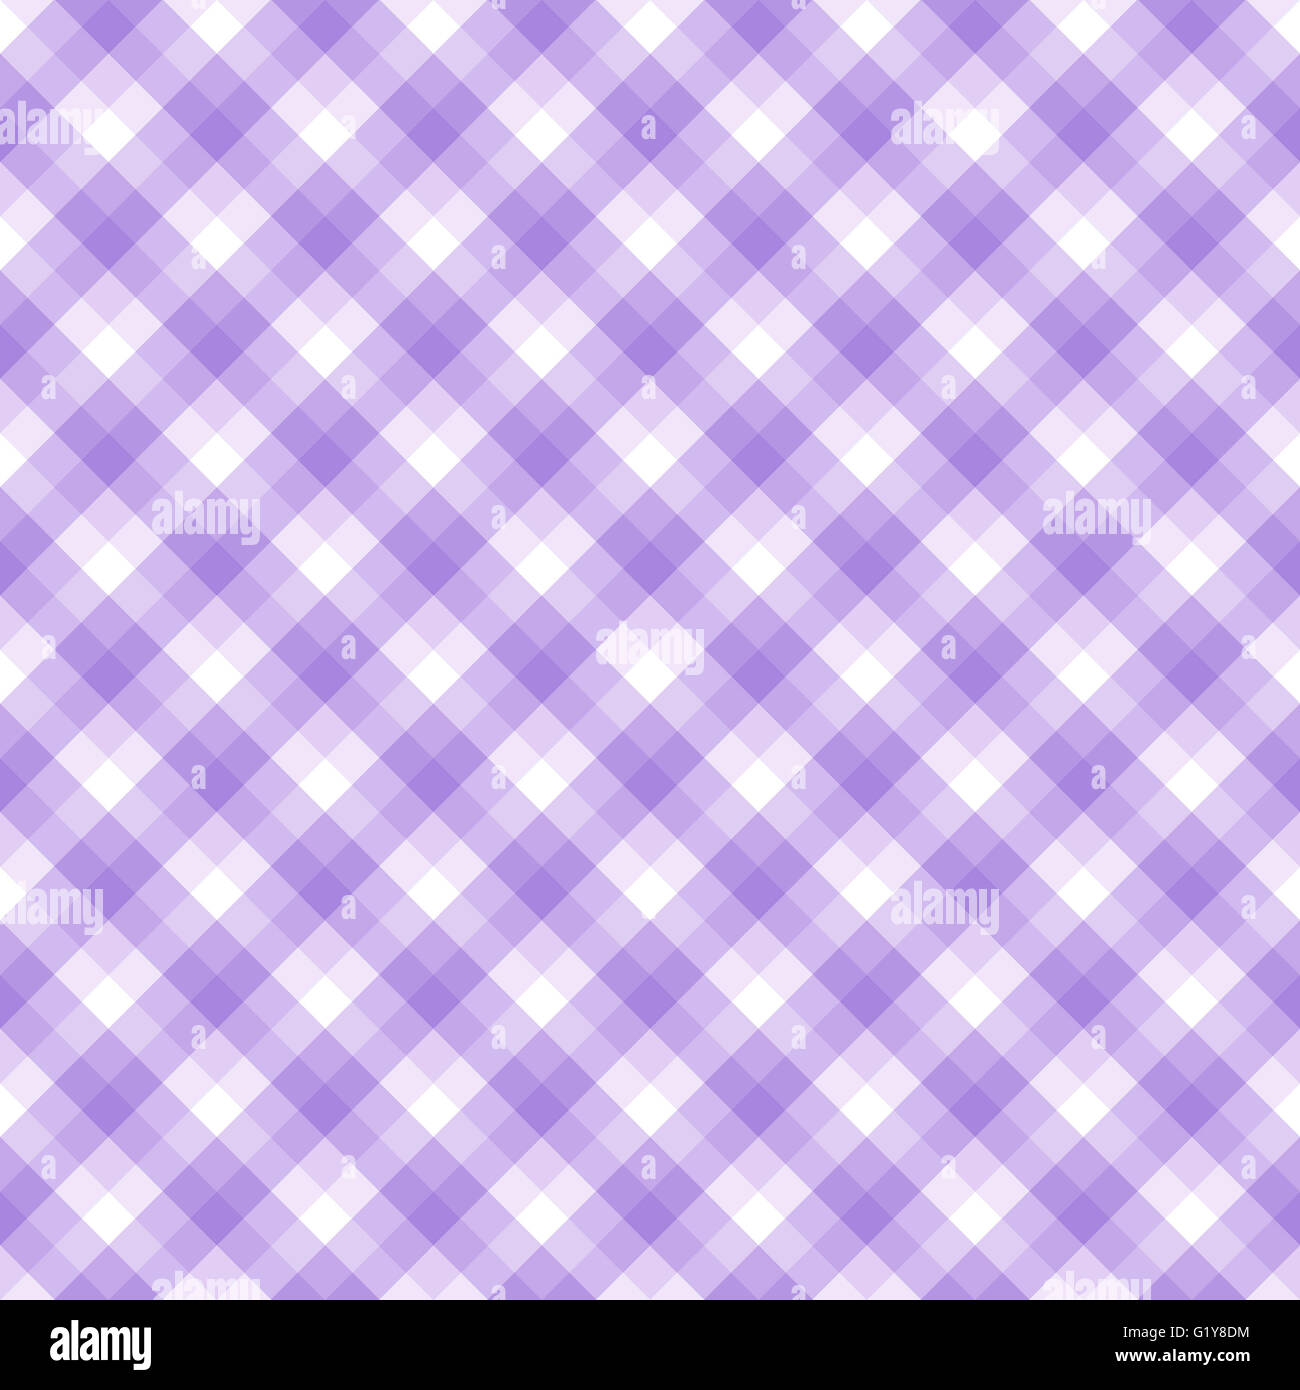 Checker pattern in hues of violet and white, seamless background Stock Photo